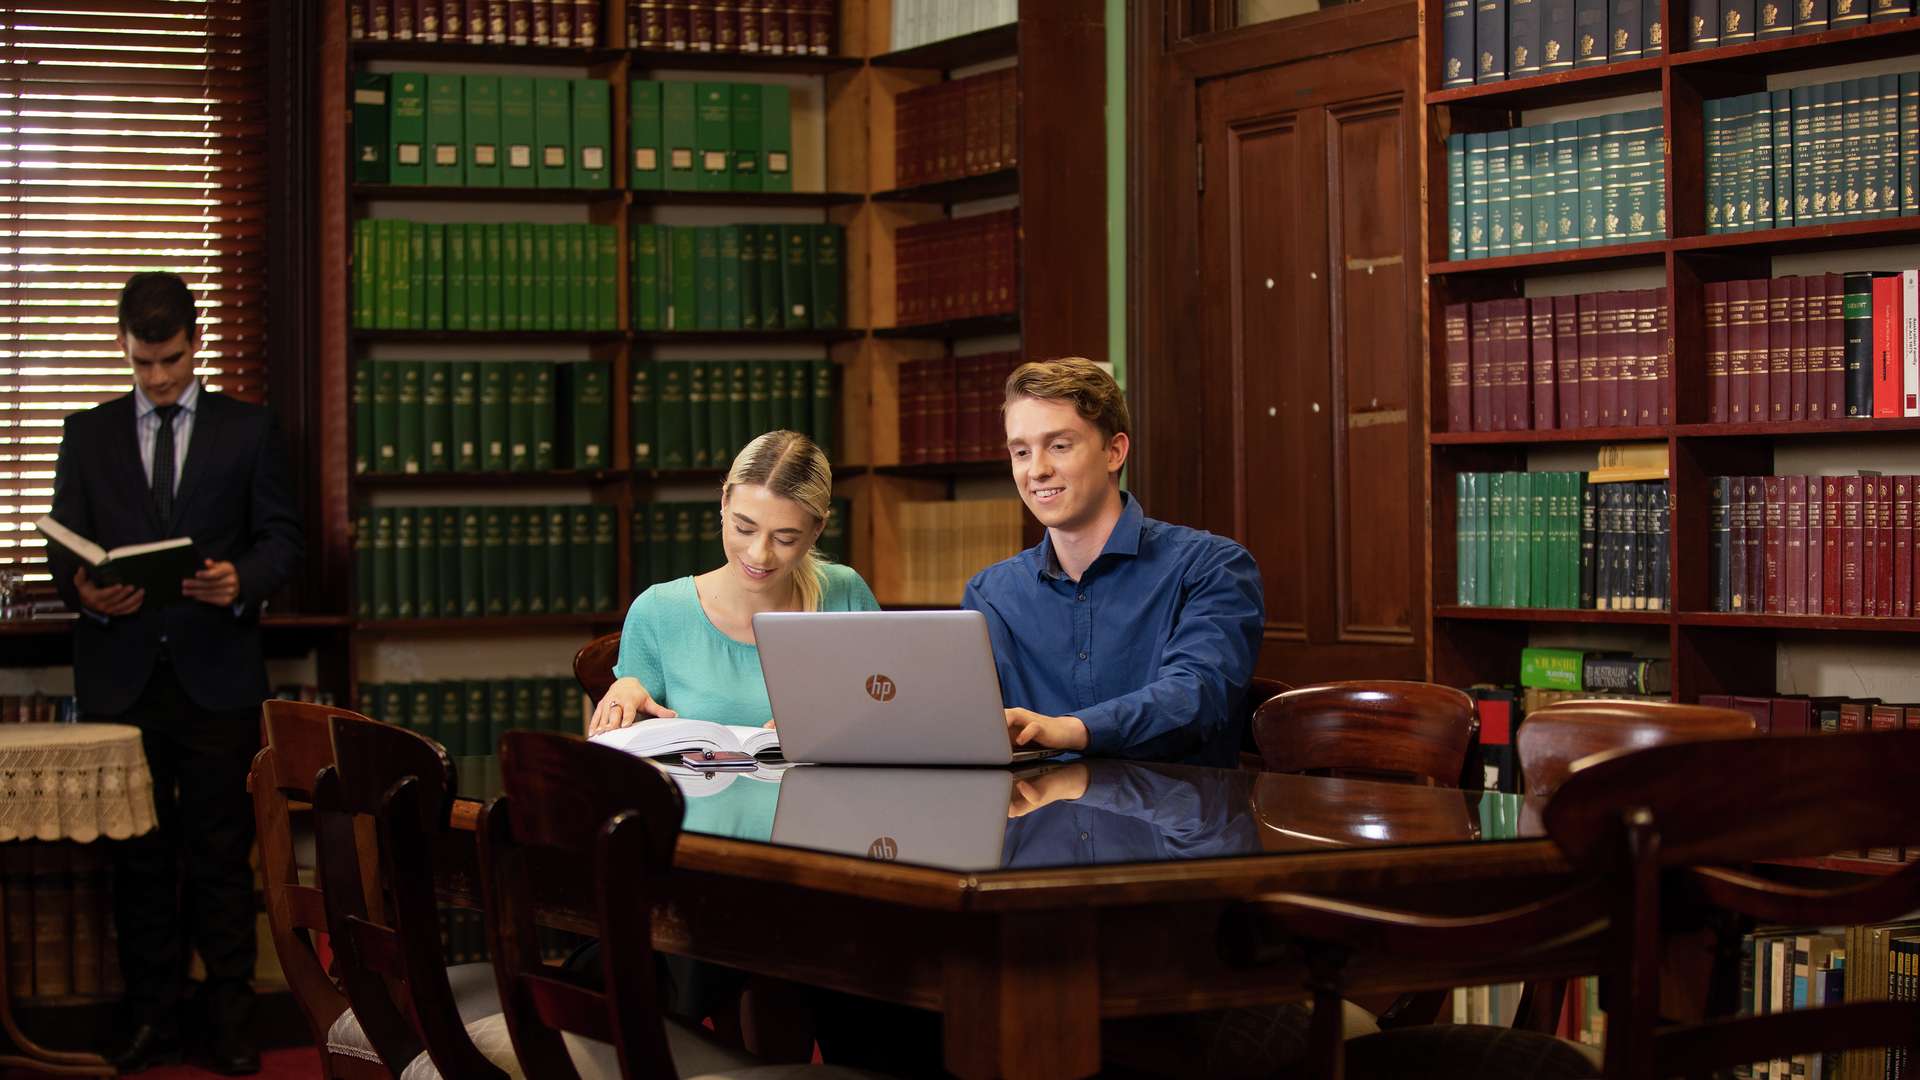 Two law students sit at a large mahogany desk in a library working. A person in a suit stands reading next to a bookcase which lines the walls.